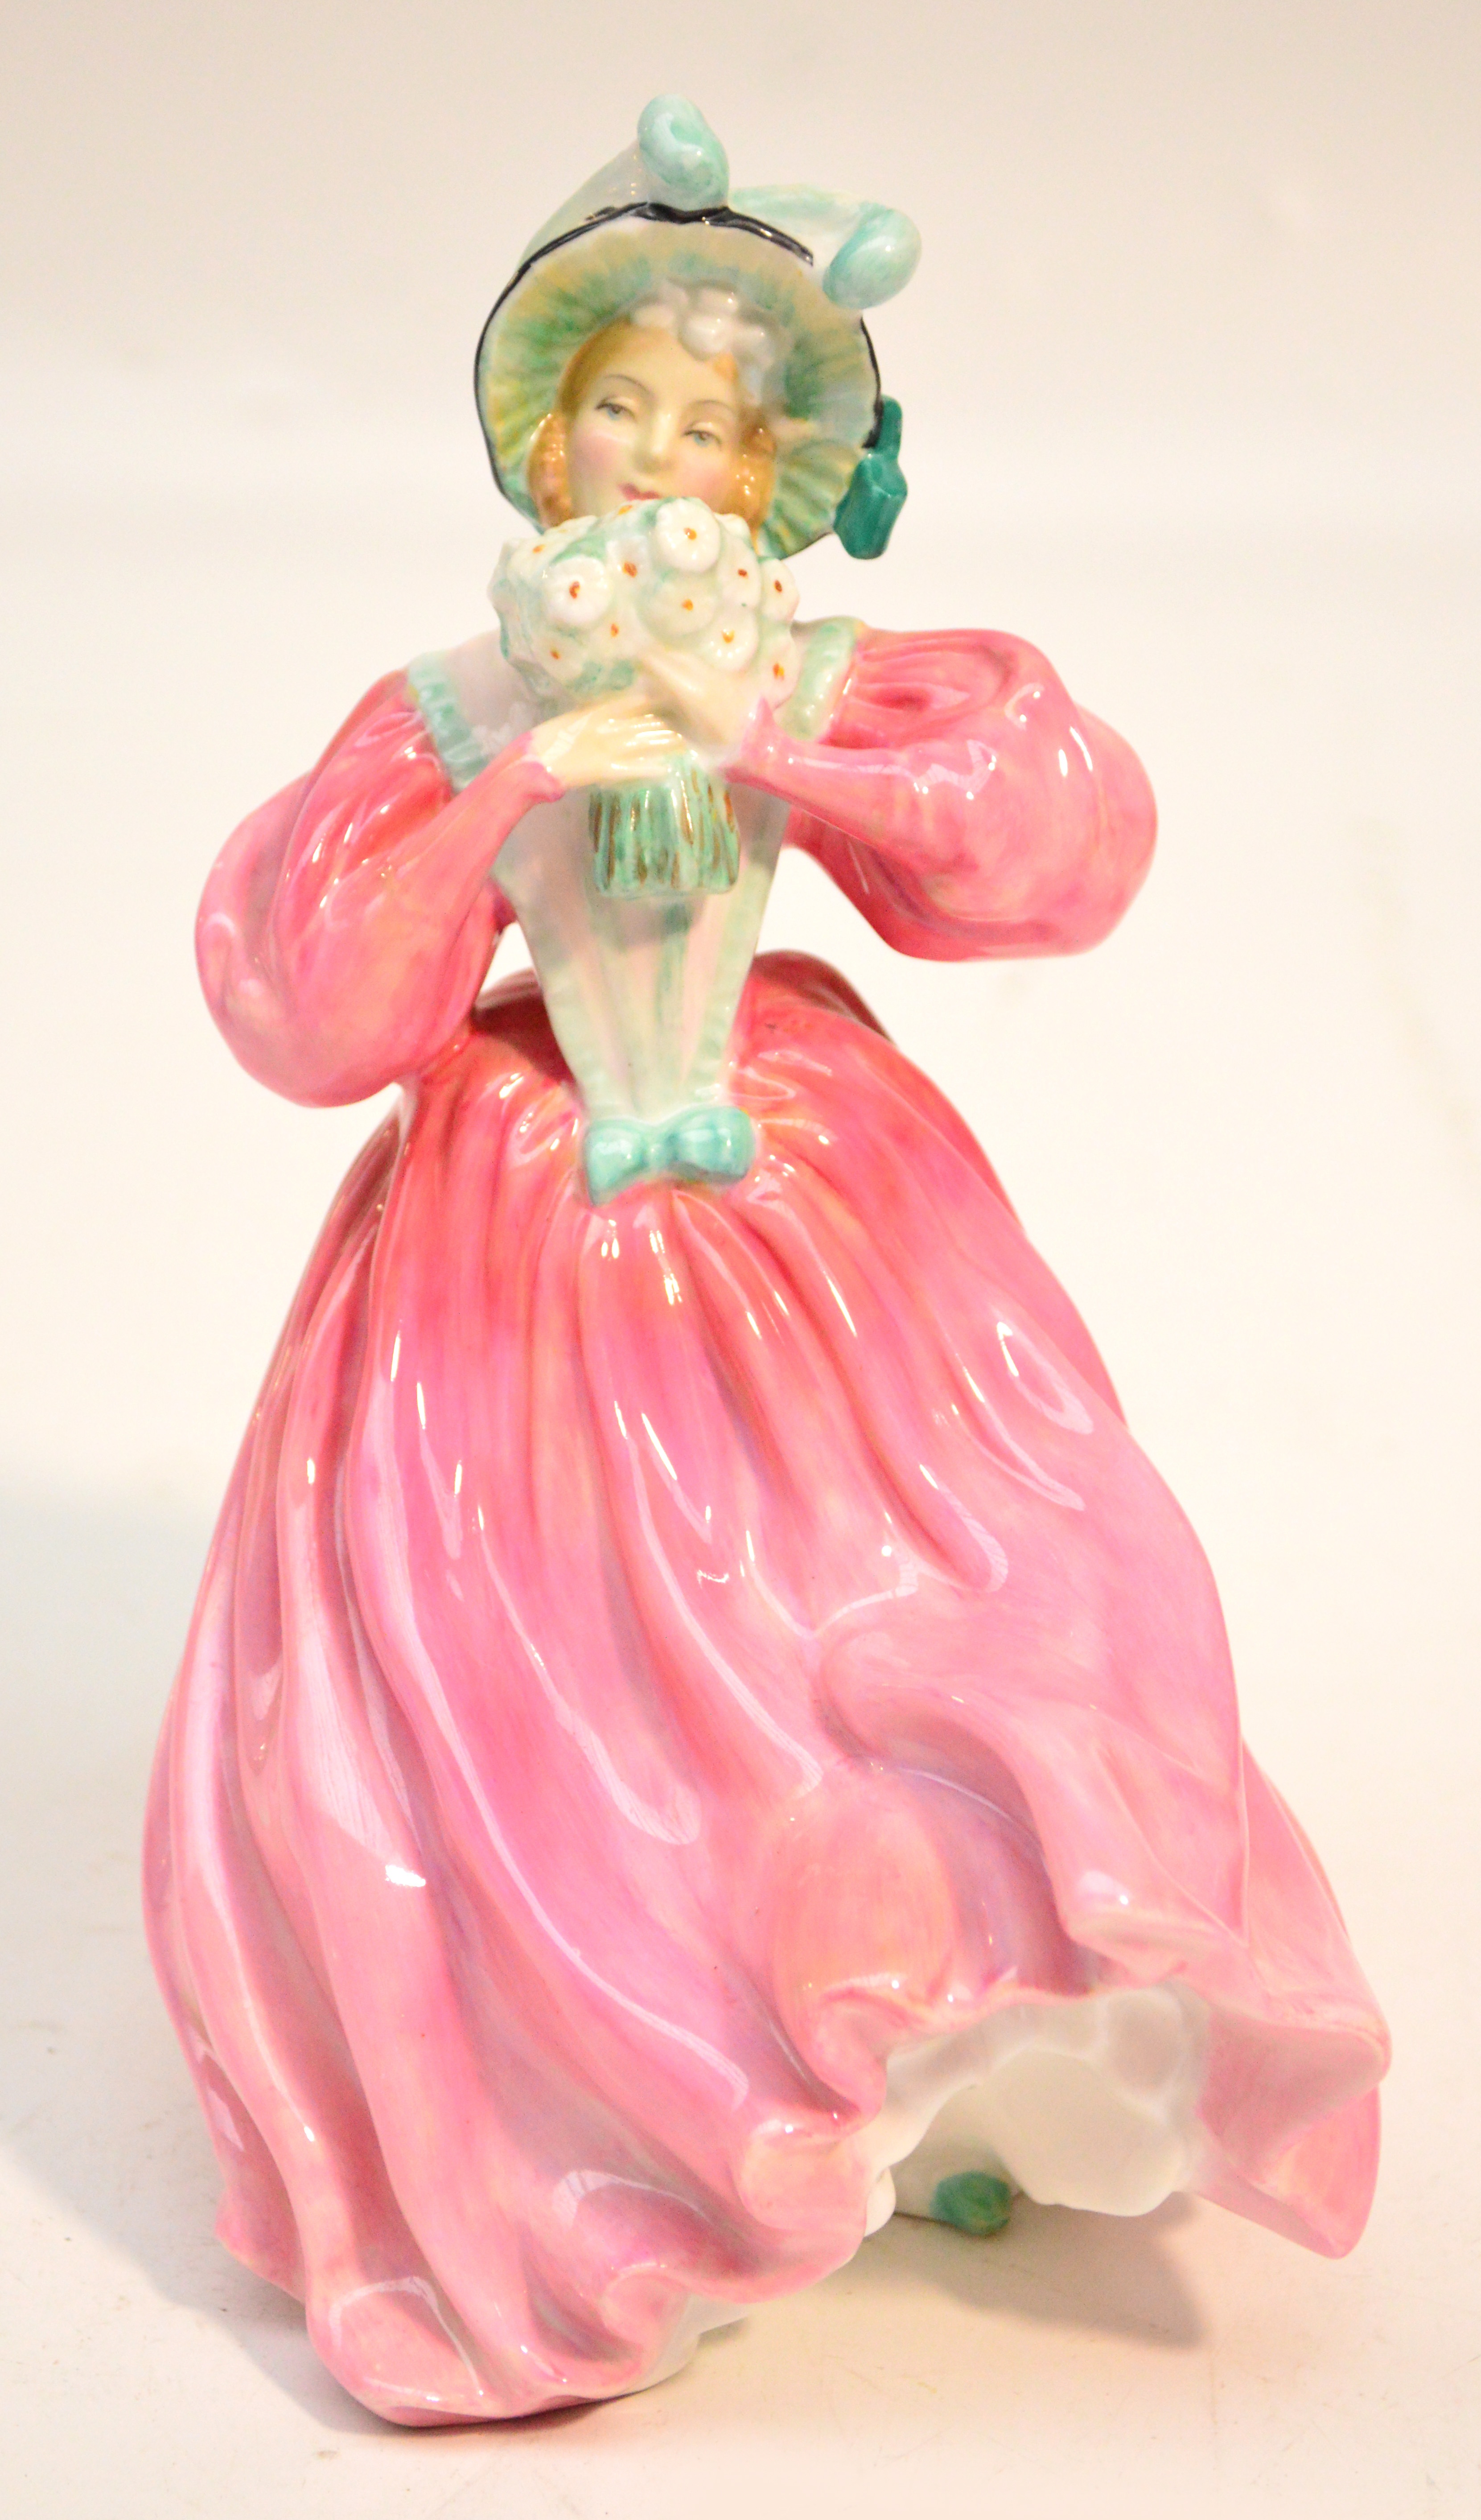 A Royal Doulton figurine HN1928 "Marguerite". CONDITION REPORT: Appears good with no obvious signs